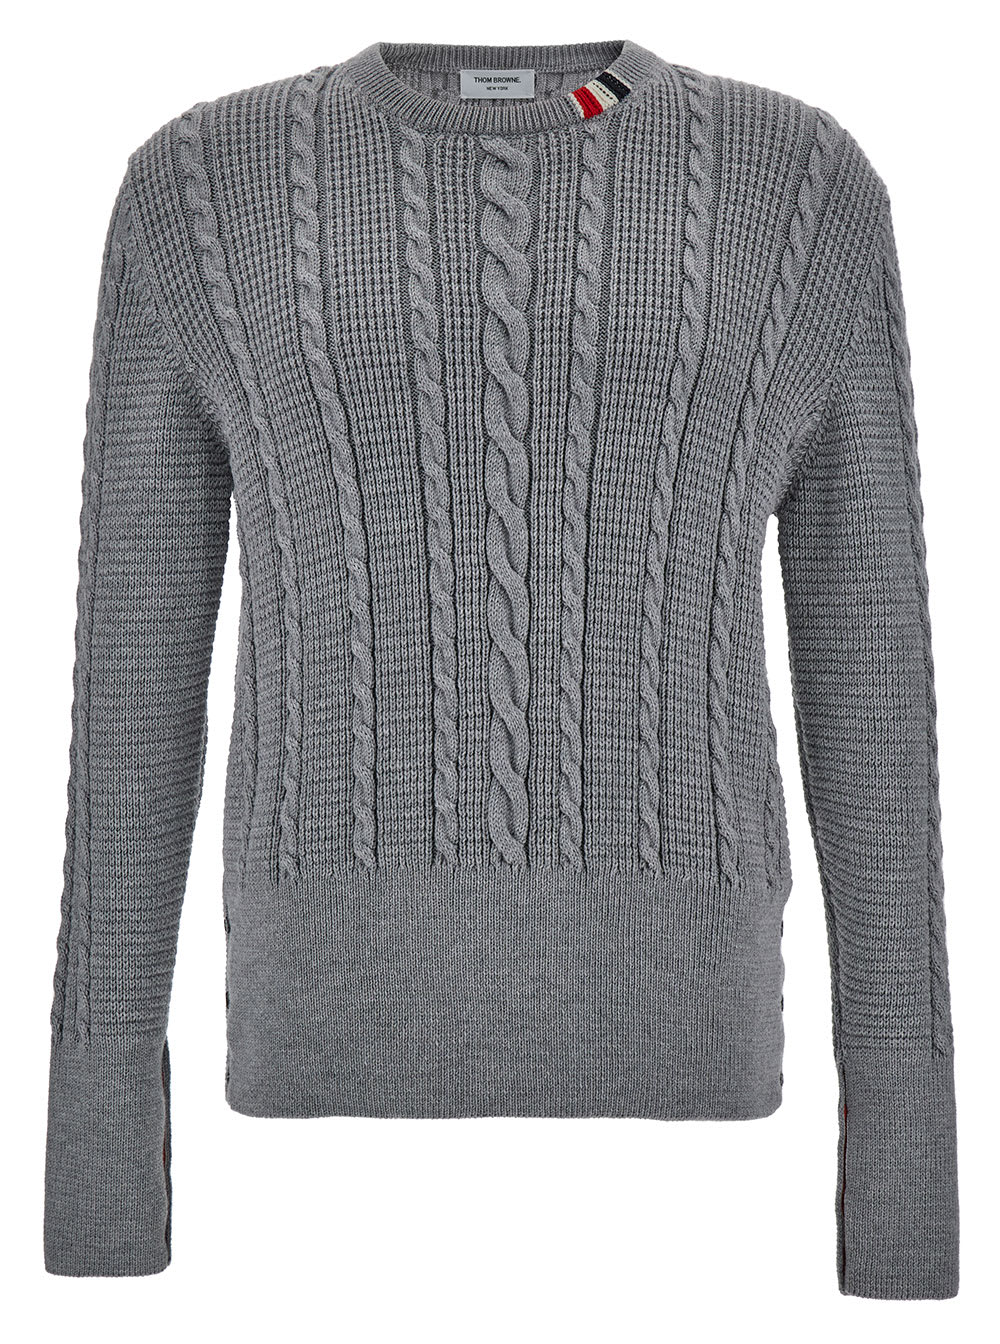 Grey Crewneck Cable Knit Sweater With Rwb Stripe Detail In Wool Man